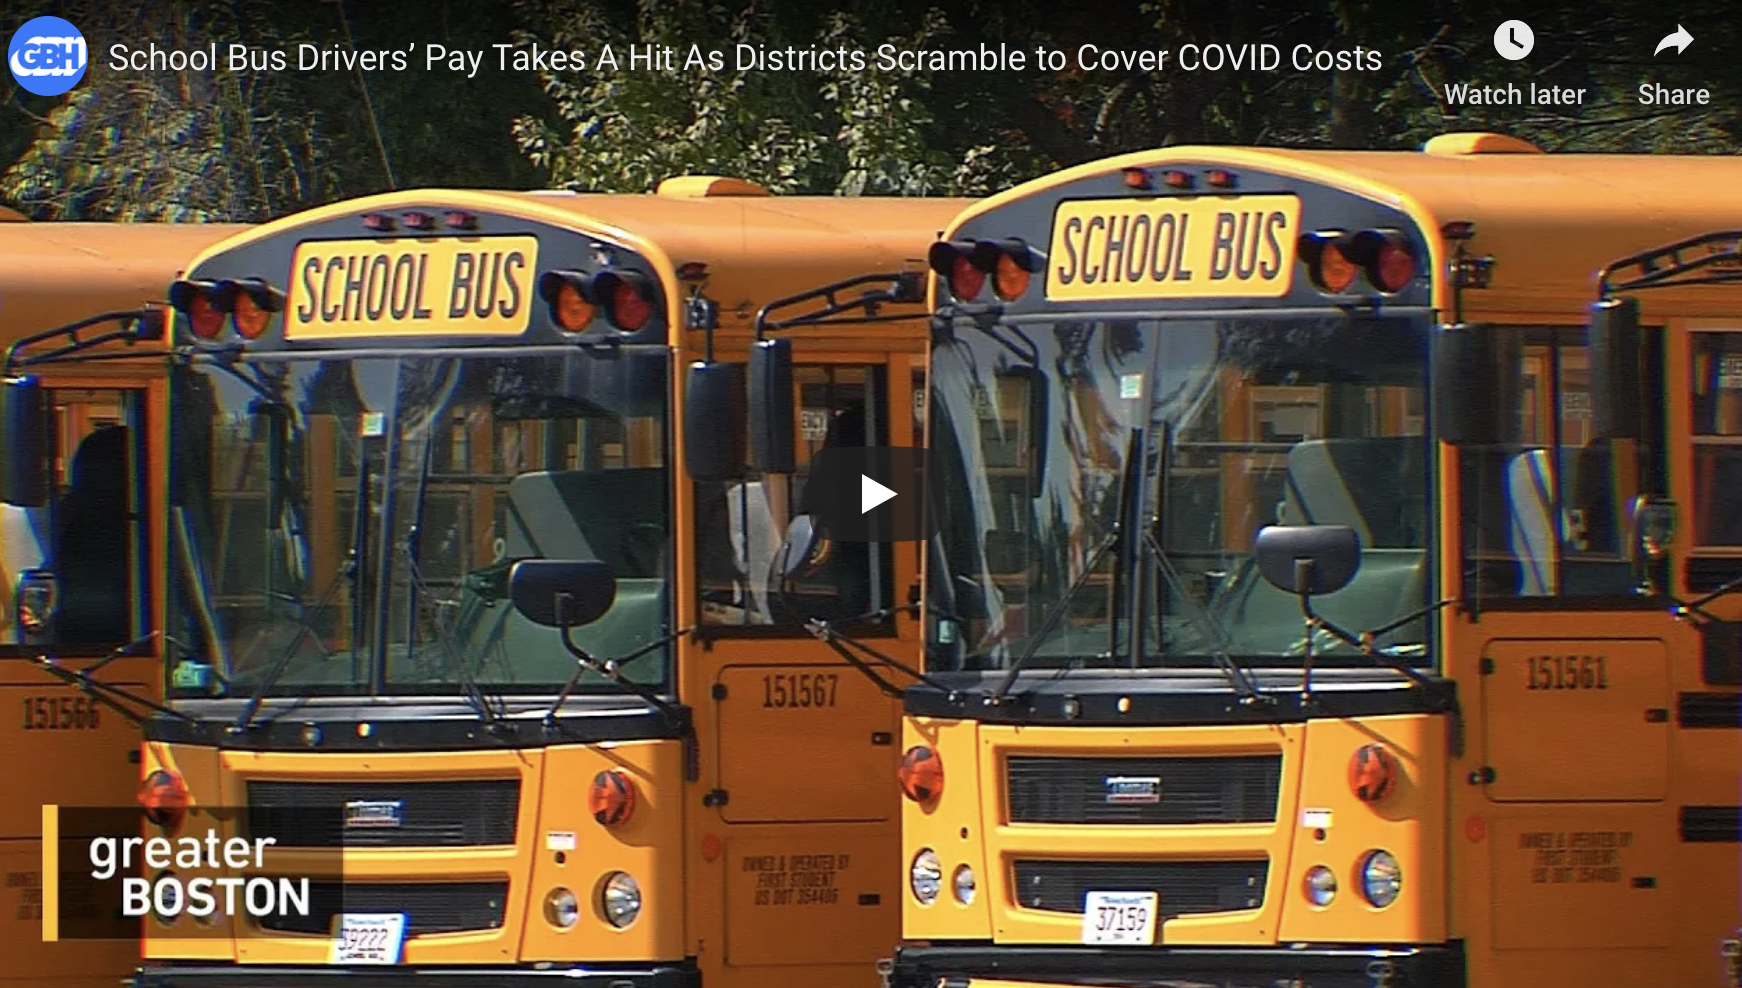 School Bus Companies, And Drivers, Face COVID’s Financial Fallout